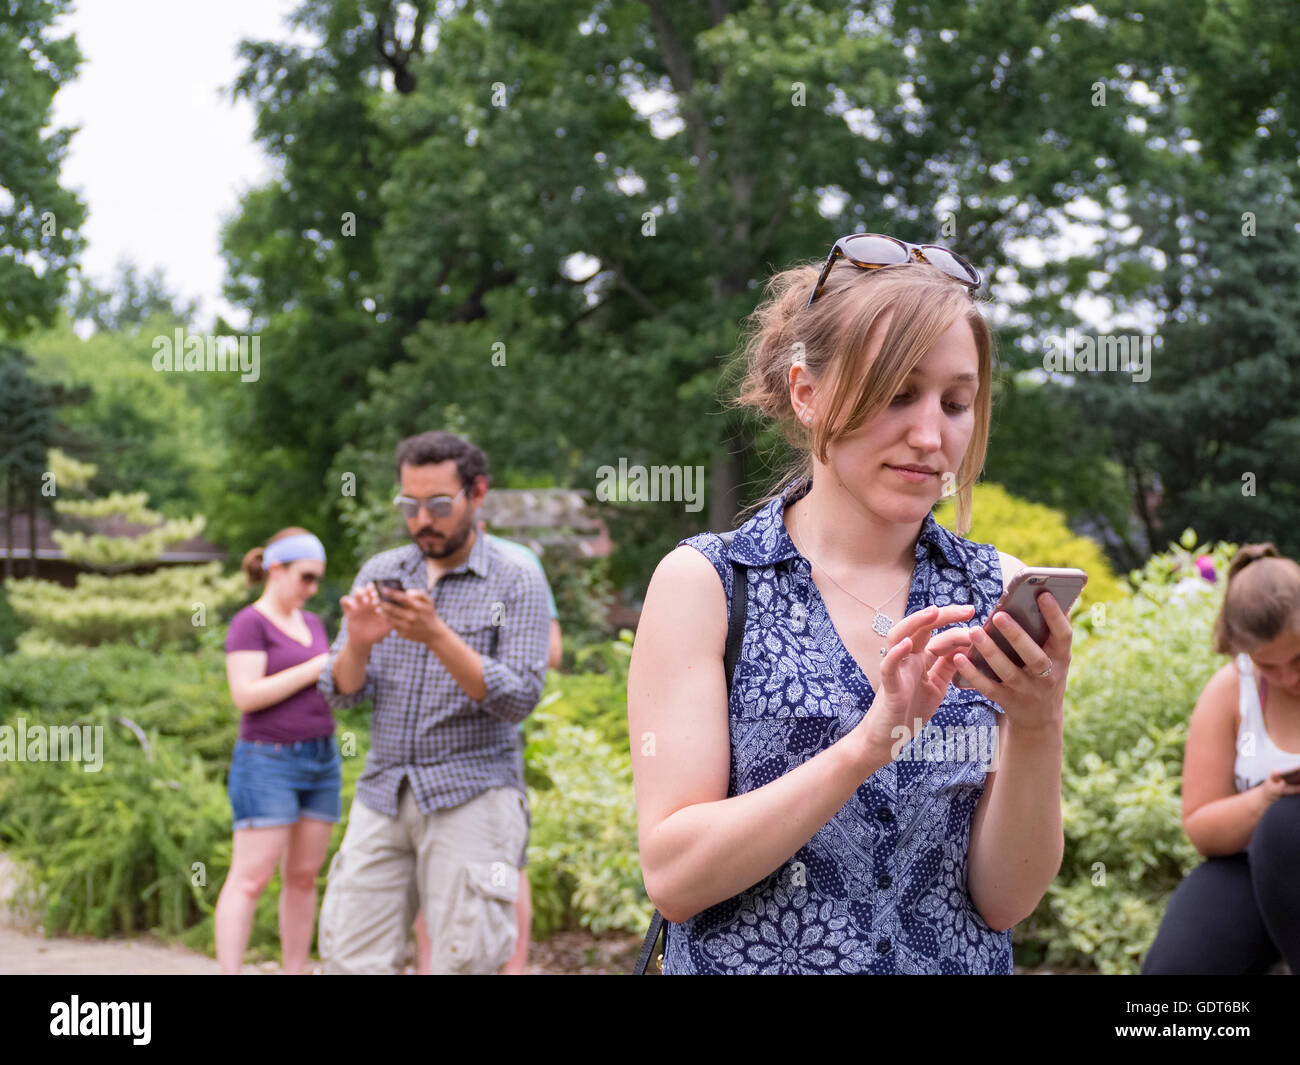 Columbus, Ohio, USA, 21 July 2016: Millennials both a young man and young women play Pokemon Go at the Park of Roses. Pokemon Go is a location based augmented reality mobile game developed by Niantic Labs using the popular Nintendo video game action figures Credit:  2016 Marianne A. Campolongo/Alamy Live News. Stock Photo